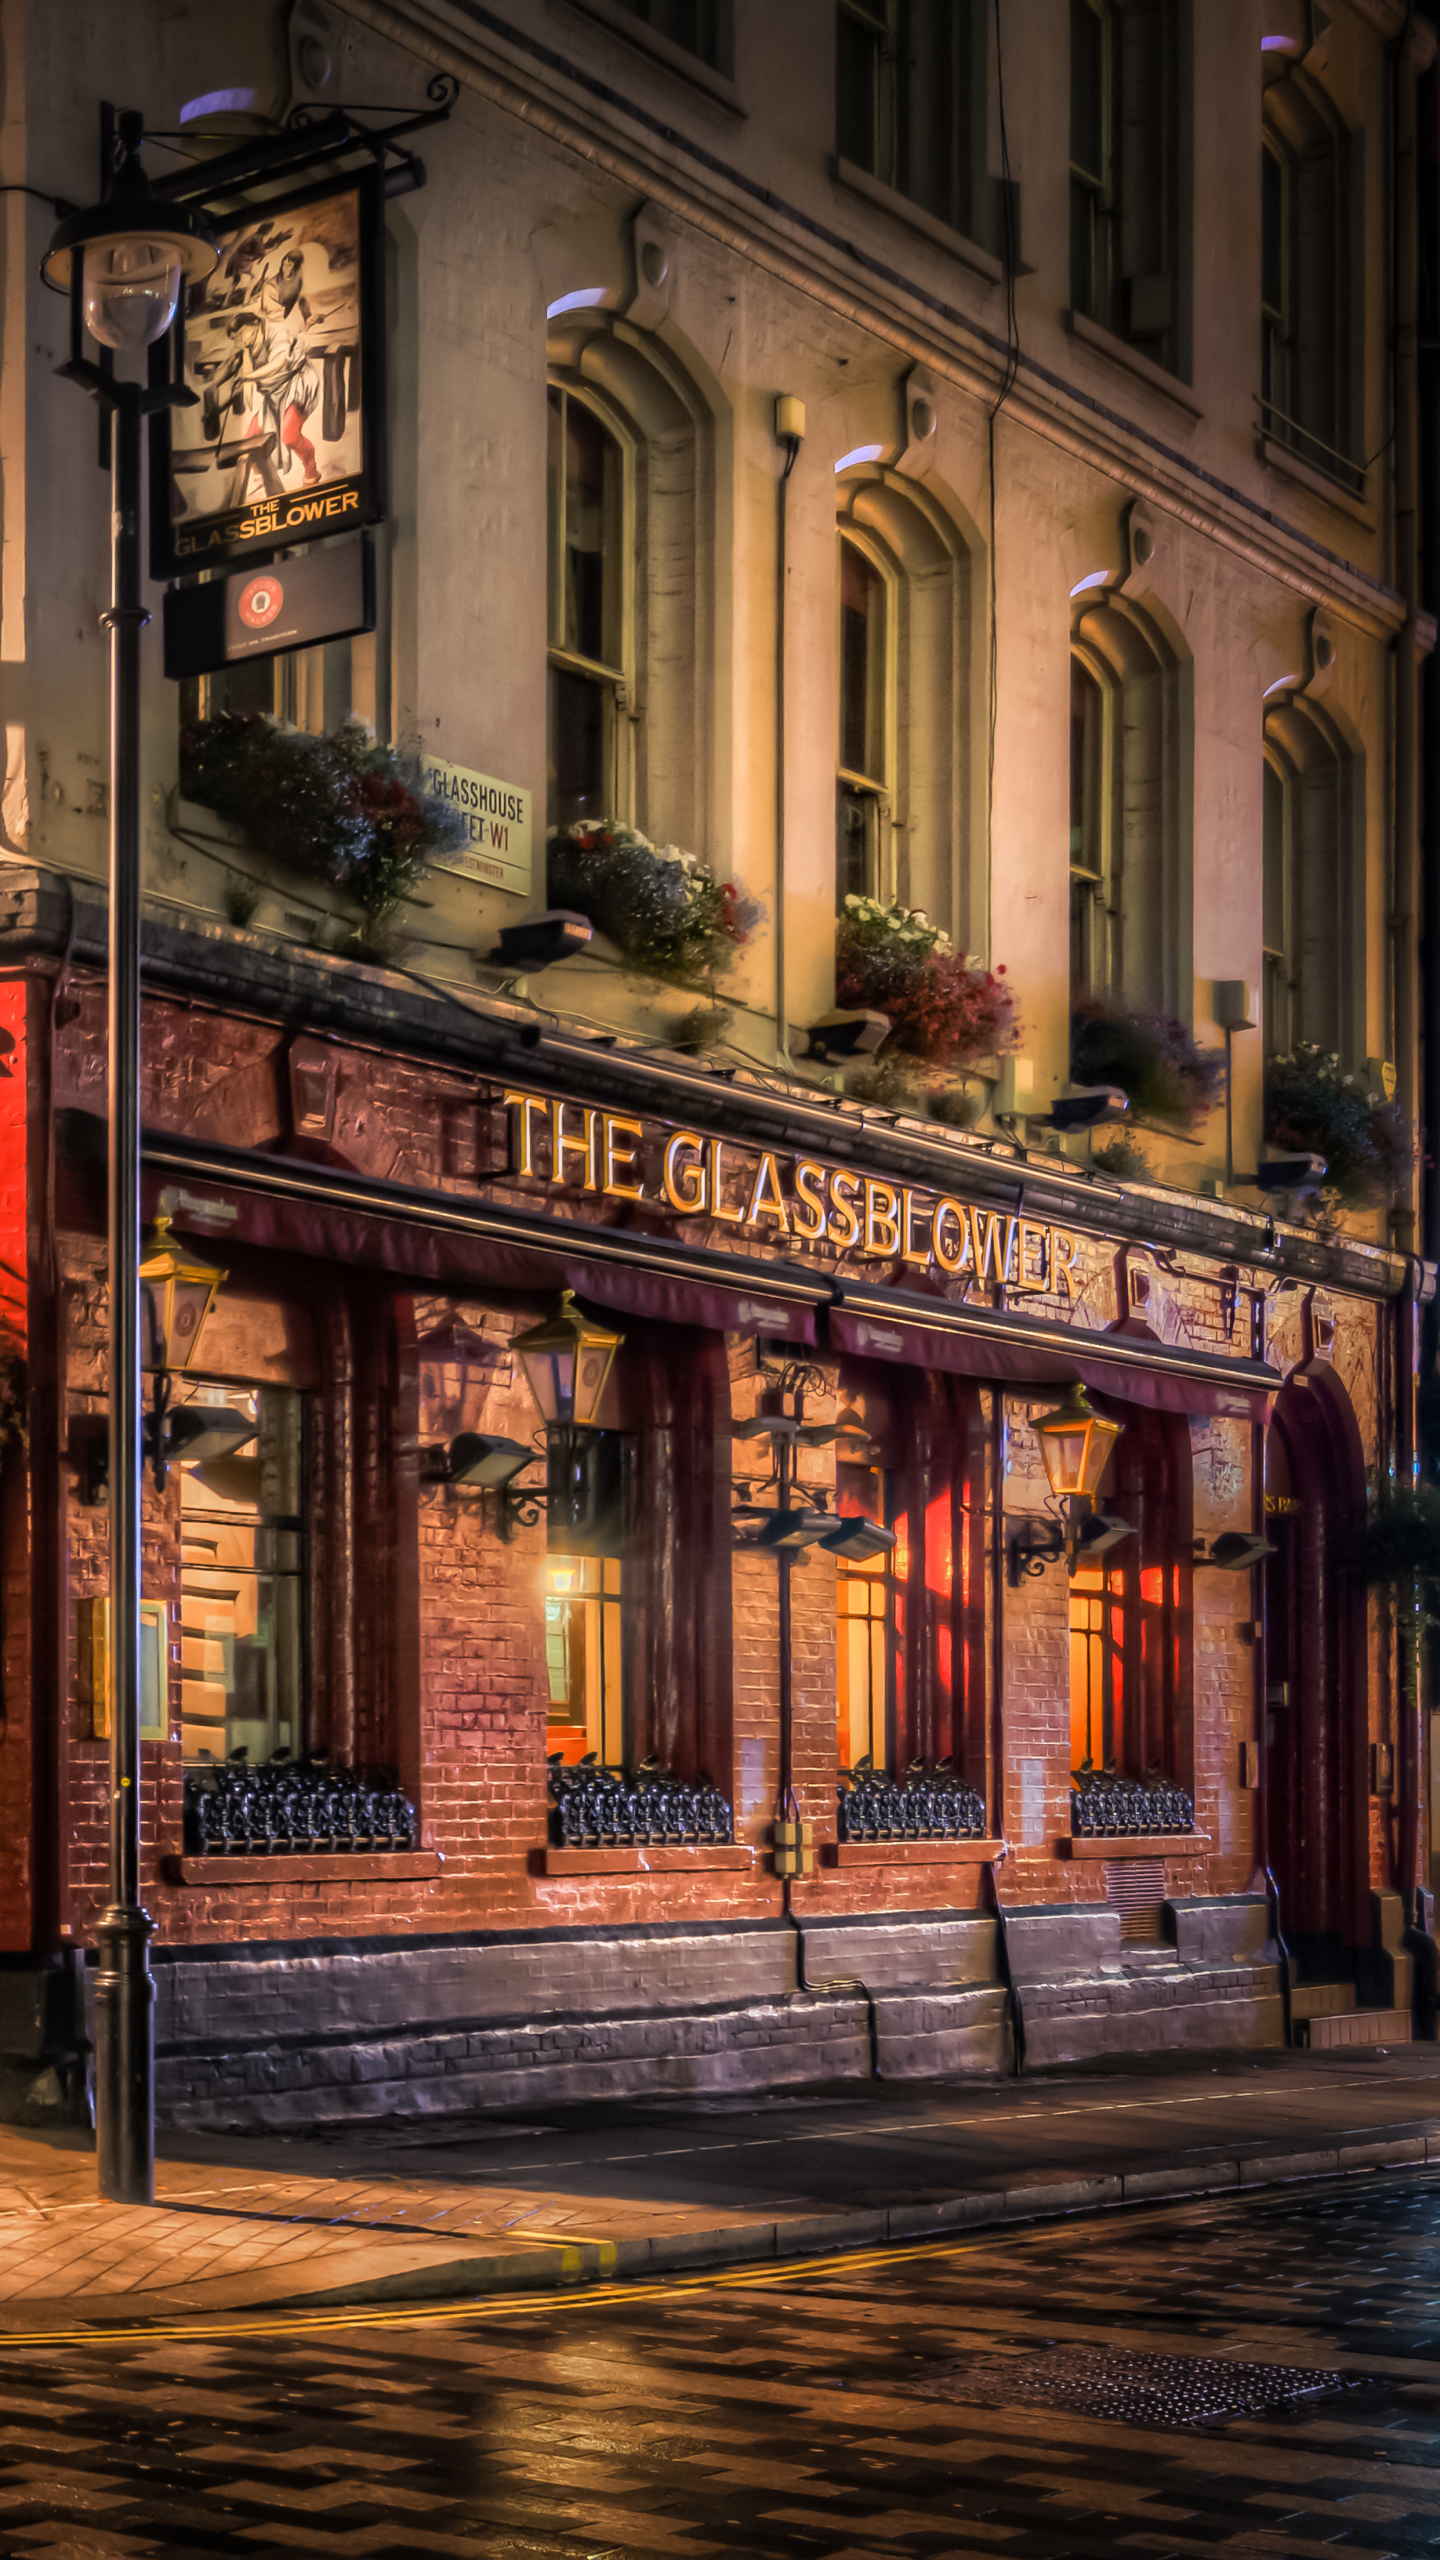 The Brewer Pub by Jacob Surland